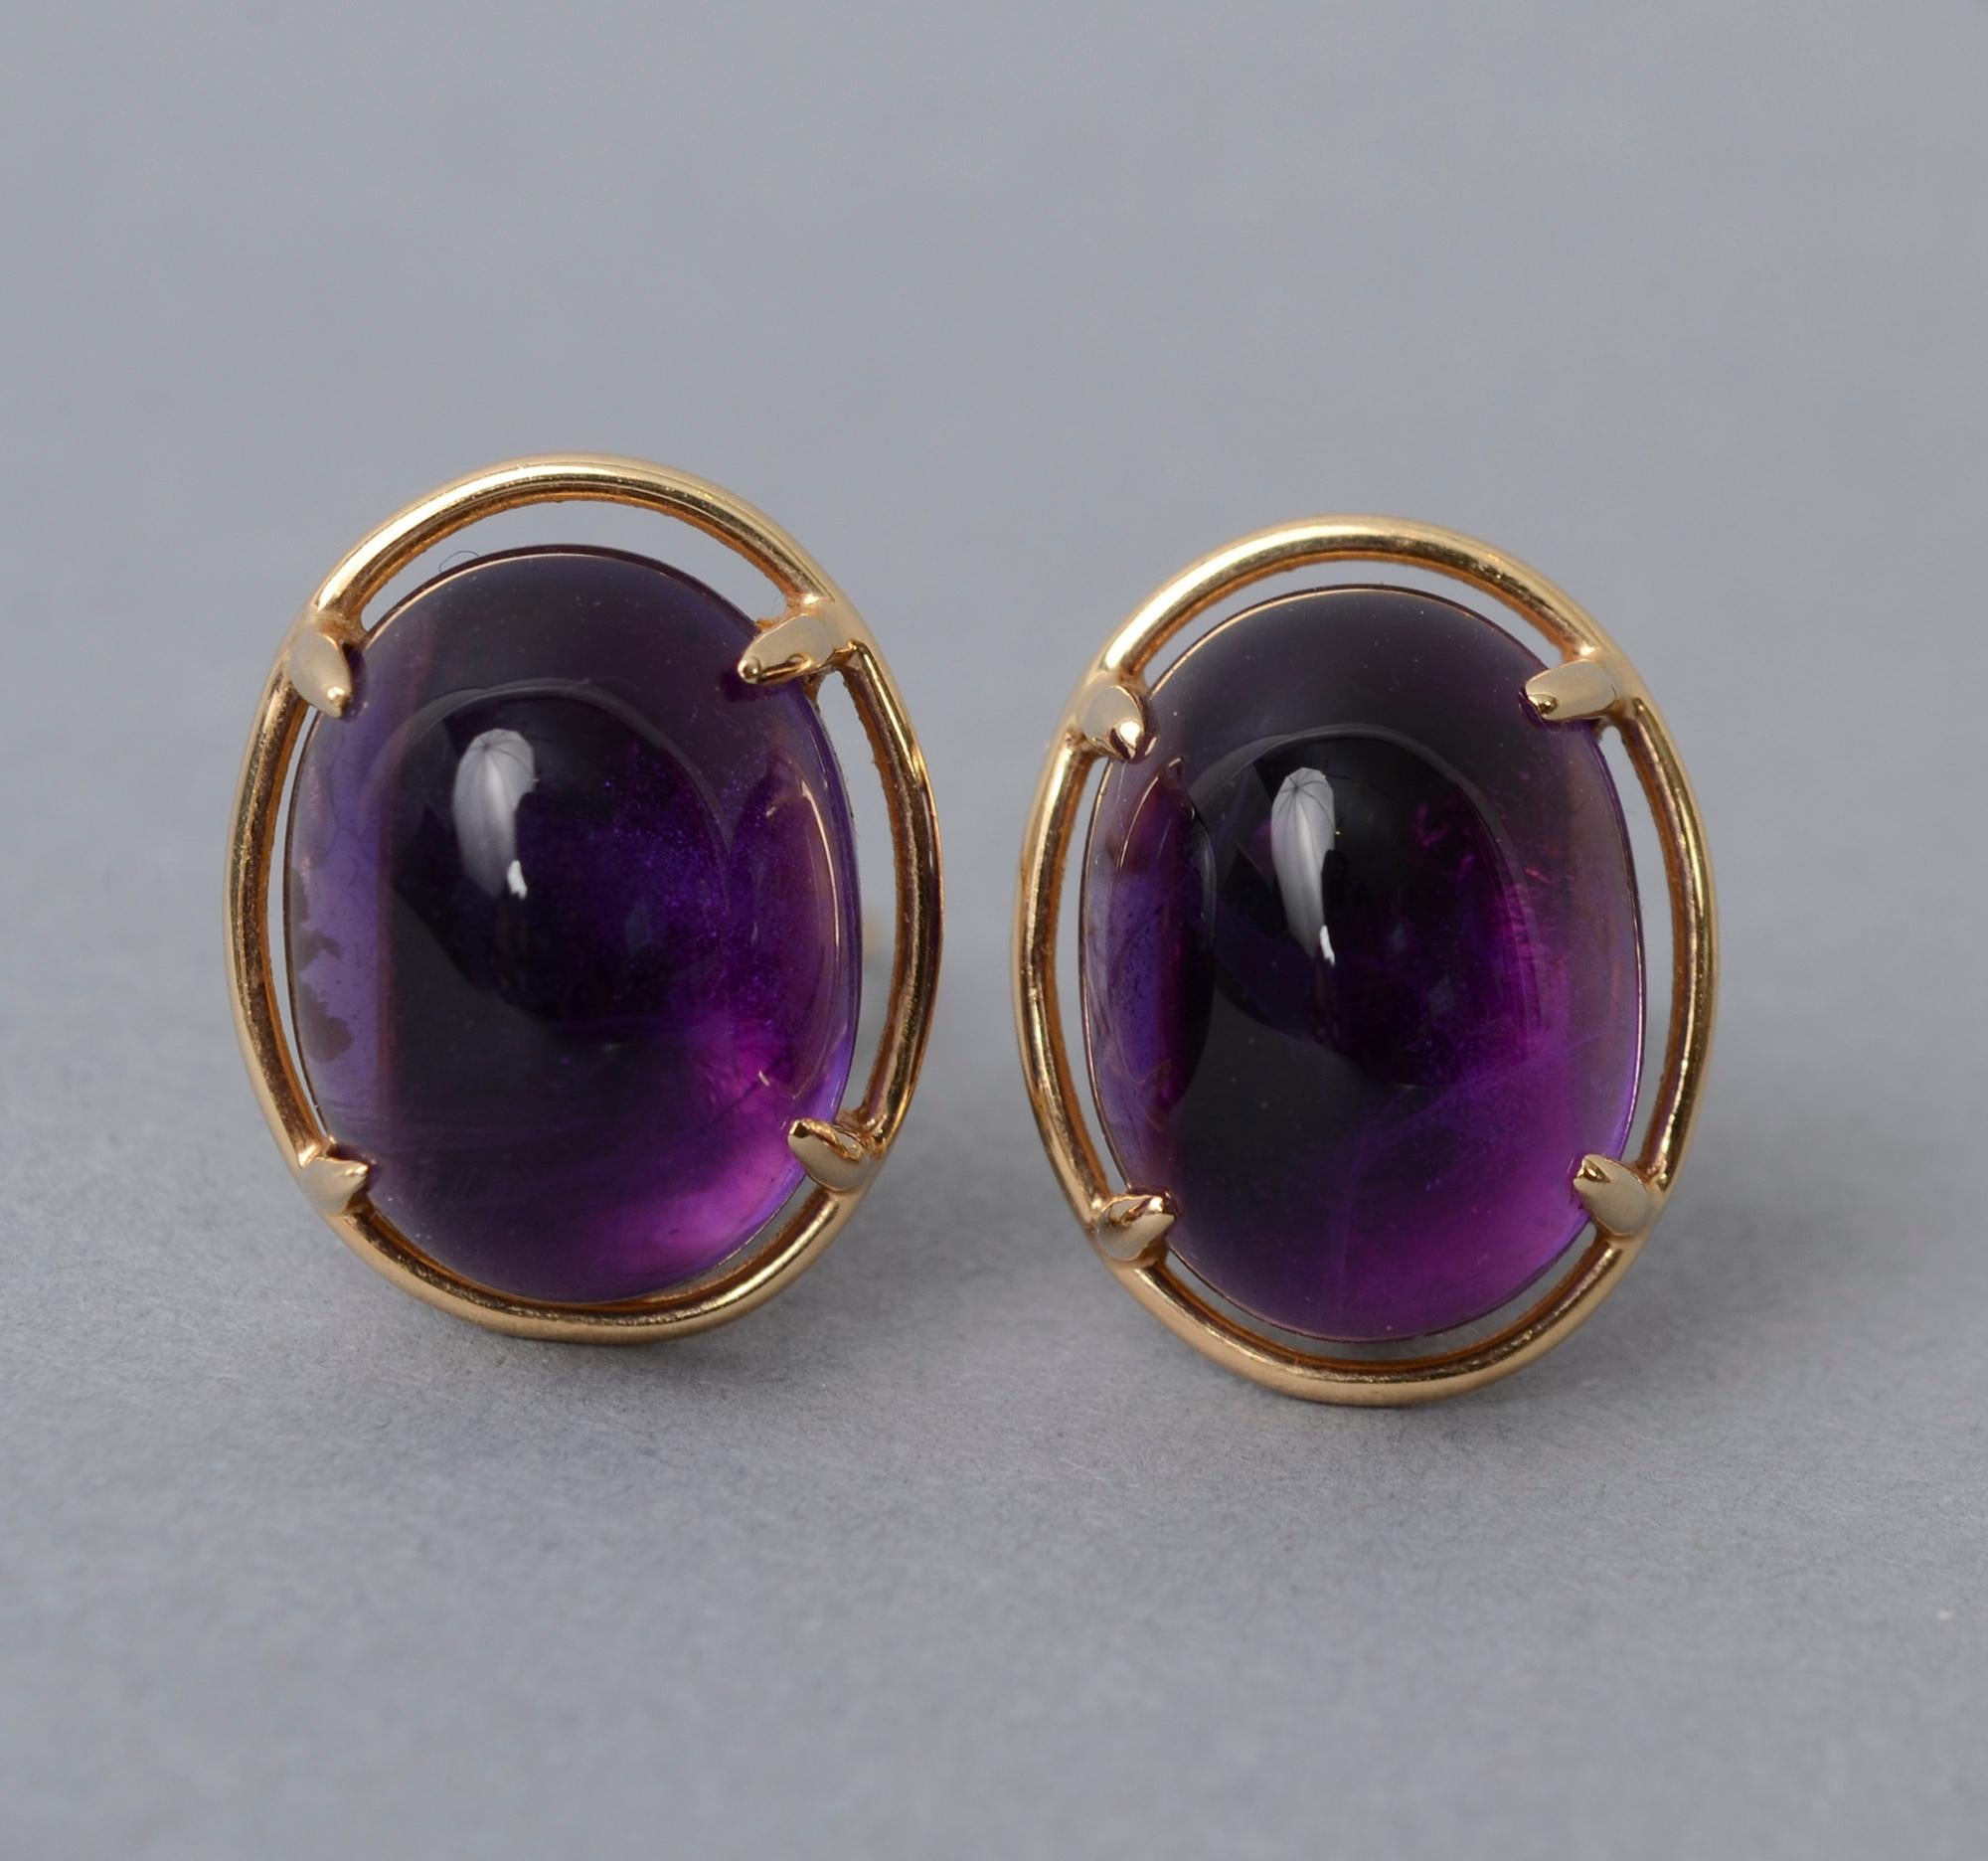 Amethyst and 14 karat gold earrings by Gump's. The oval cabochon stones are half an inch wide and 3/4 inch long. They are a wonderfully rich color. The stones are surrounded by a gold band and held with four prongs. Backs are clips and posts.